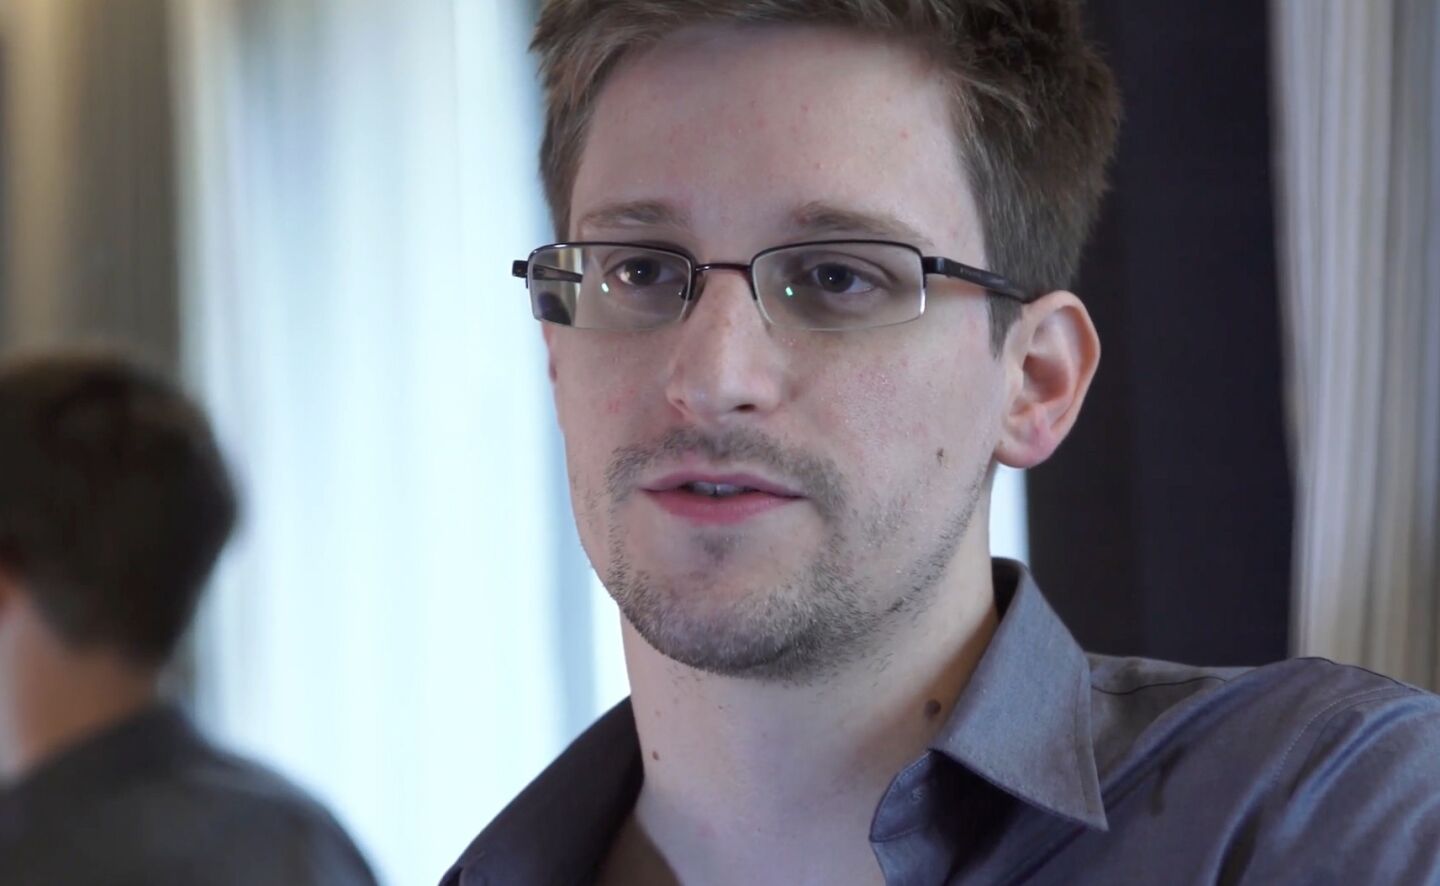 Edward Snowden, who worked as a contract employee at the National Security Agency, in Hong Kong.